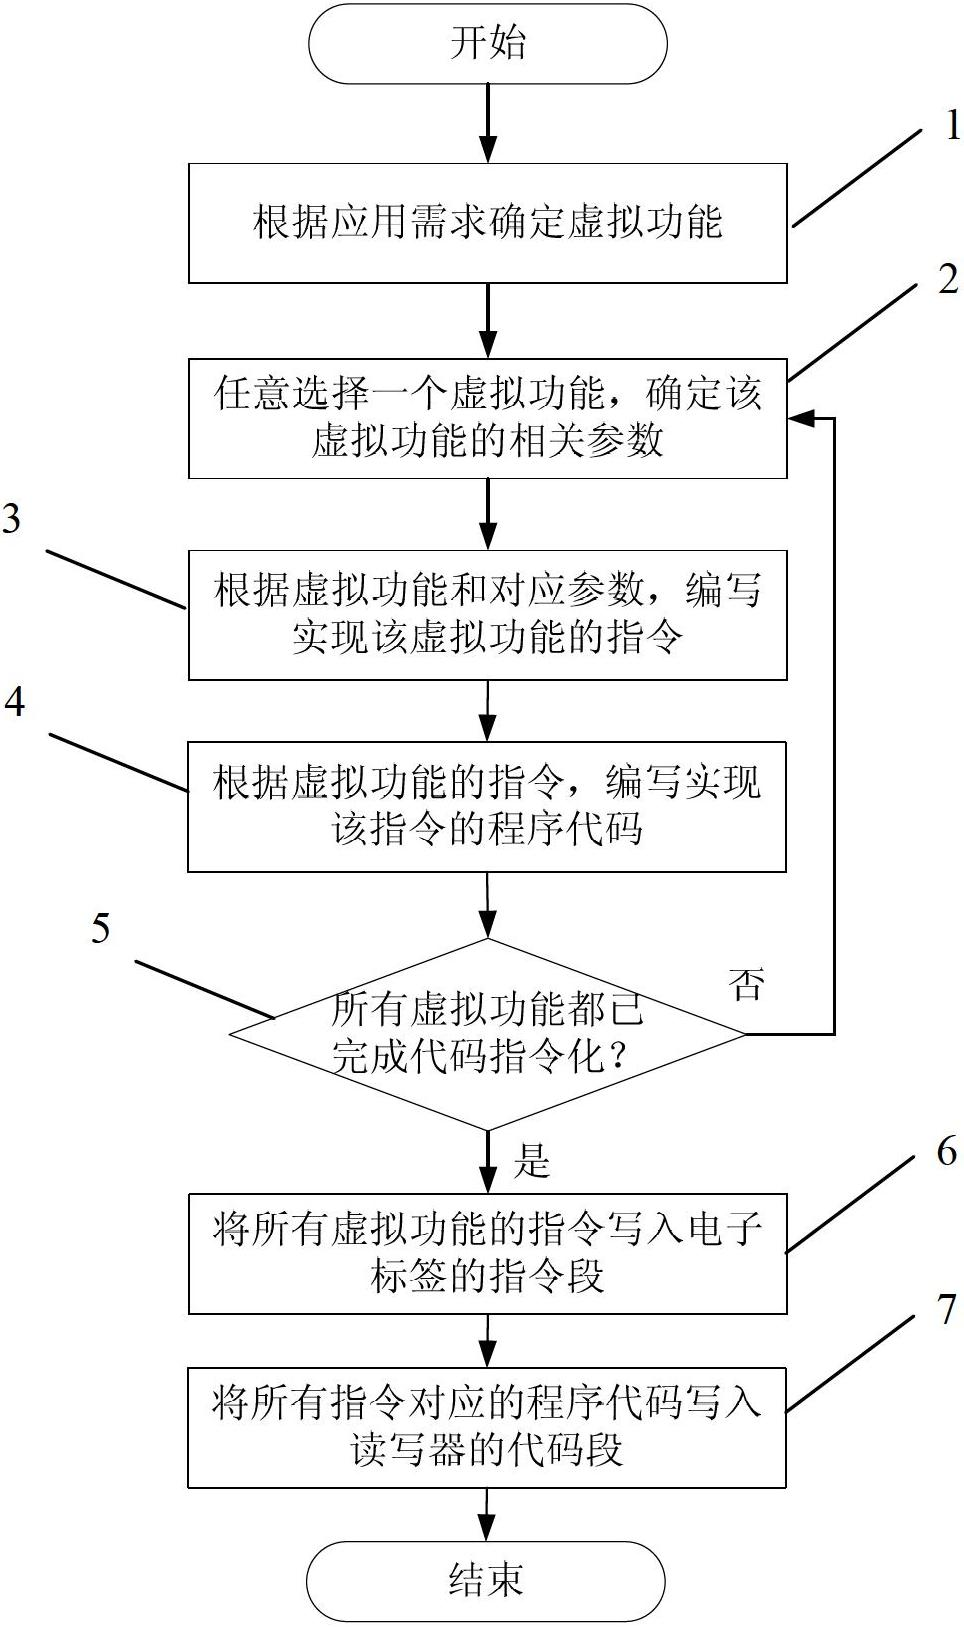 Intelligent electronic label information system and information interaction method thereof